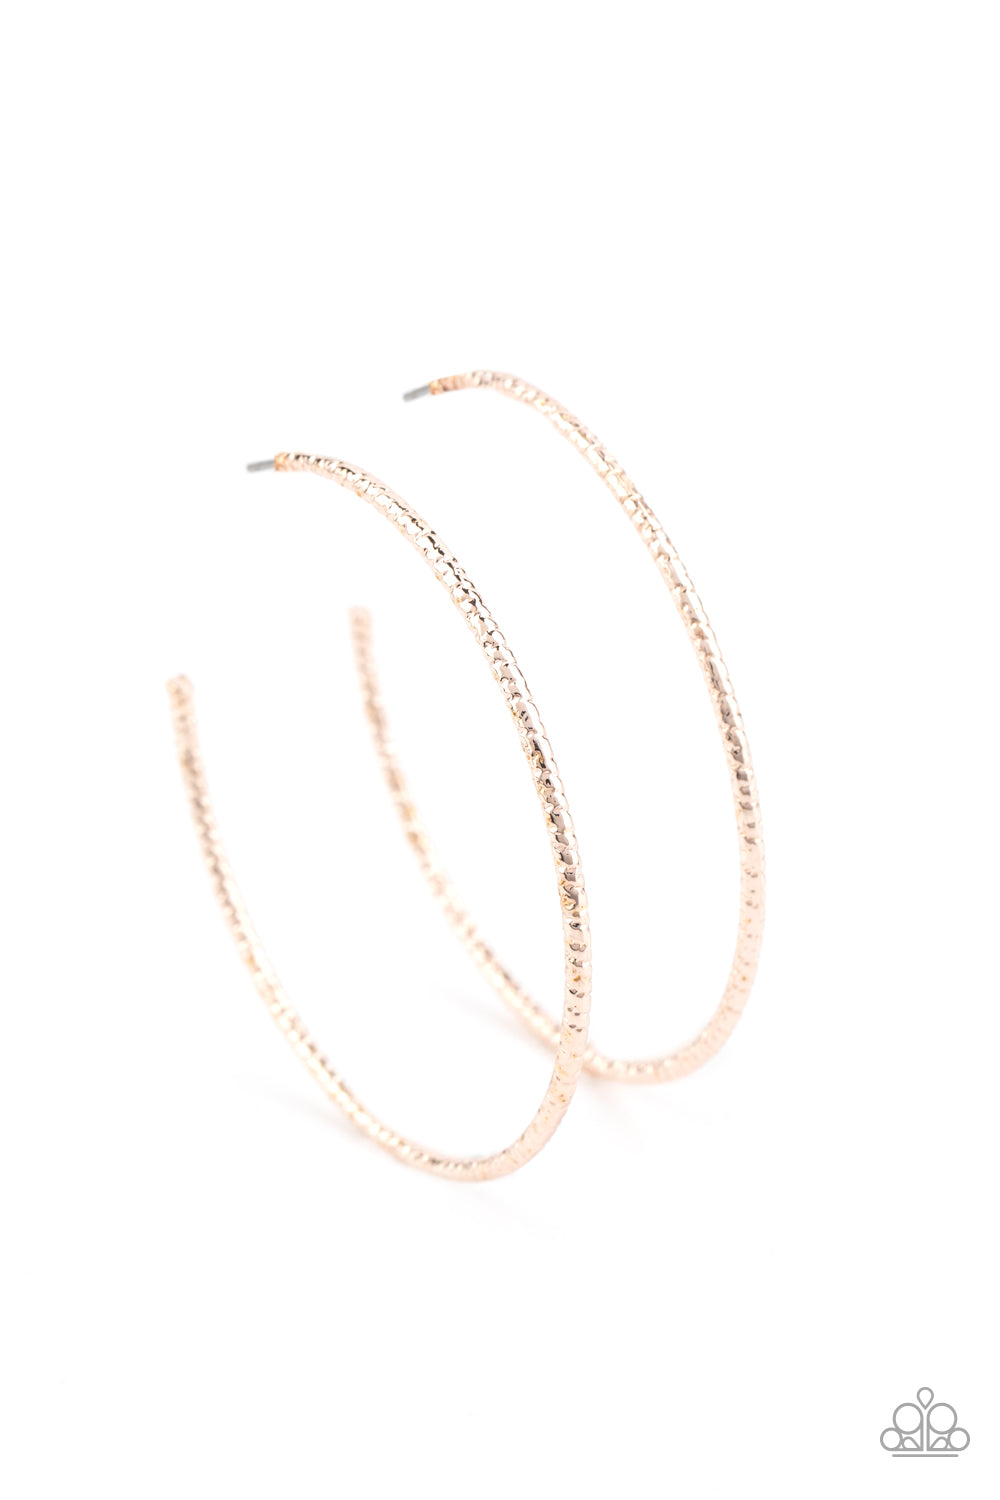 Inclined To Entwine Earrings - Rose Gold